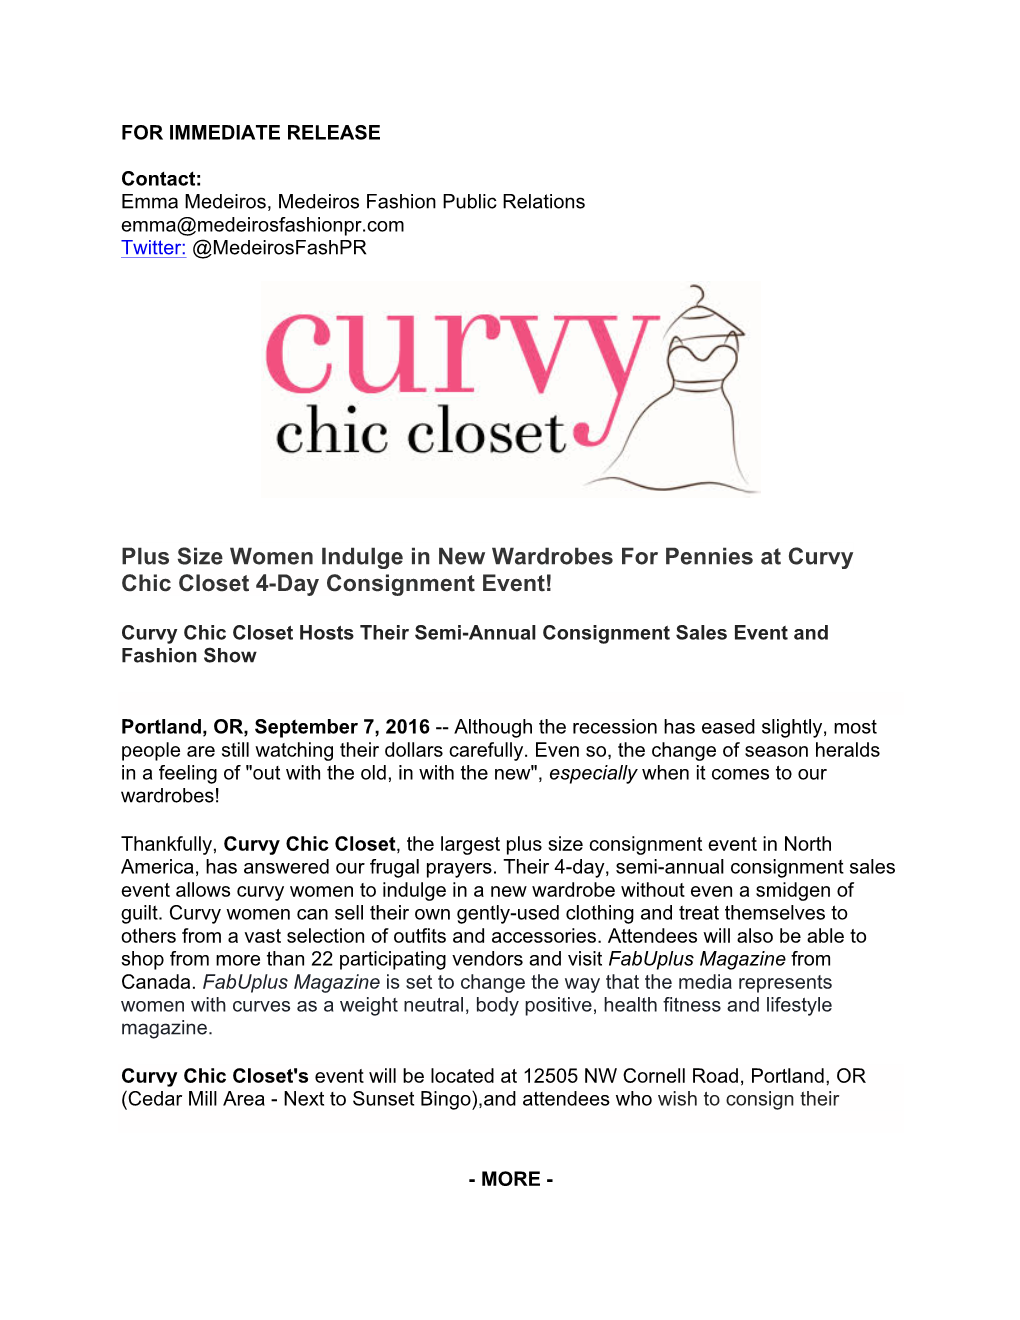 Size Women Indulge in New Wardrobes for Pennies at Curvy Chic Closet 4-Day Consignment Event!